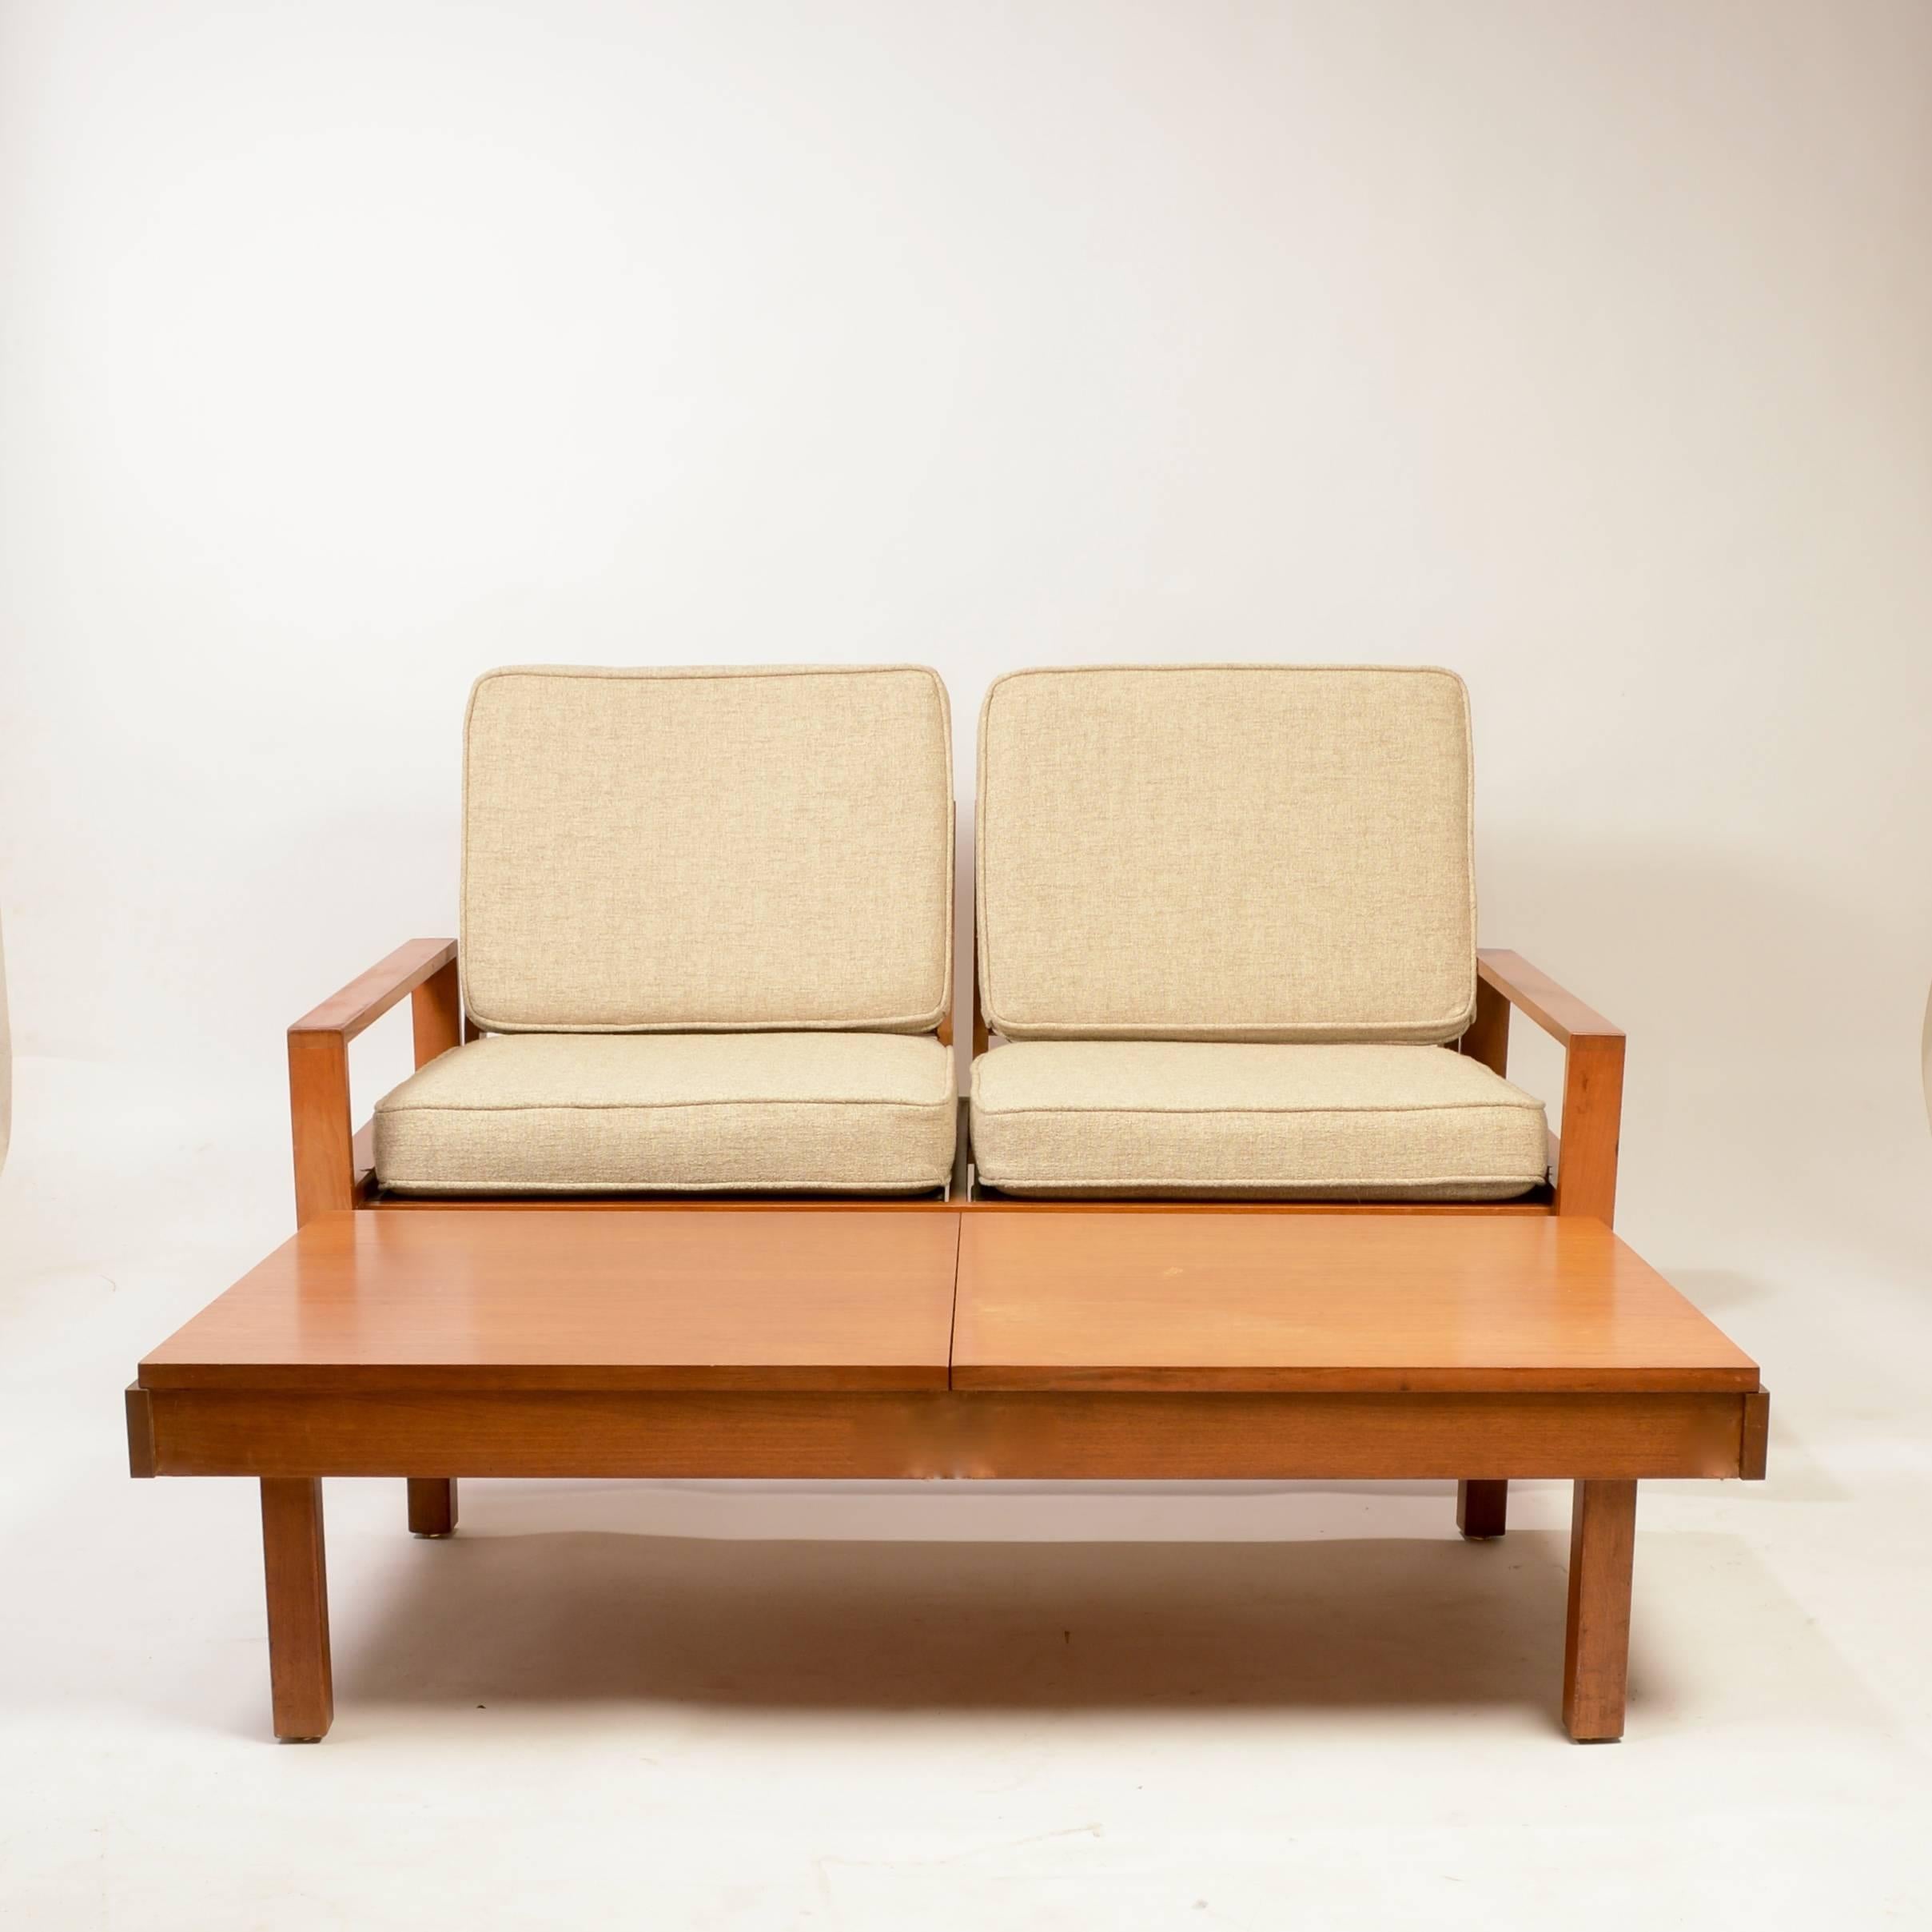 Chair by Martin Borenstein for the Brown & Saltman Modular Living Room System 2